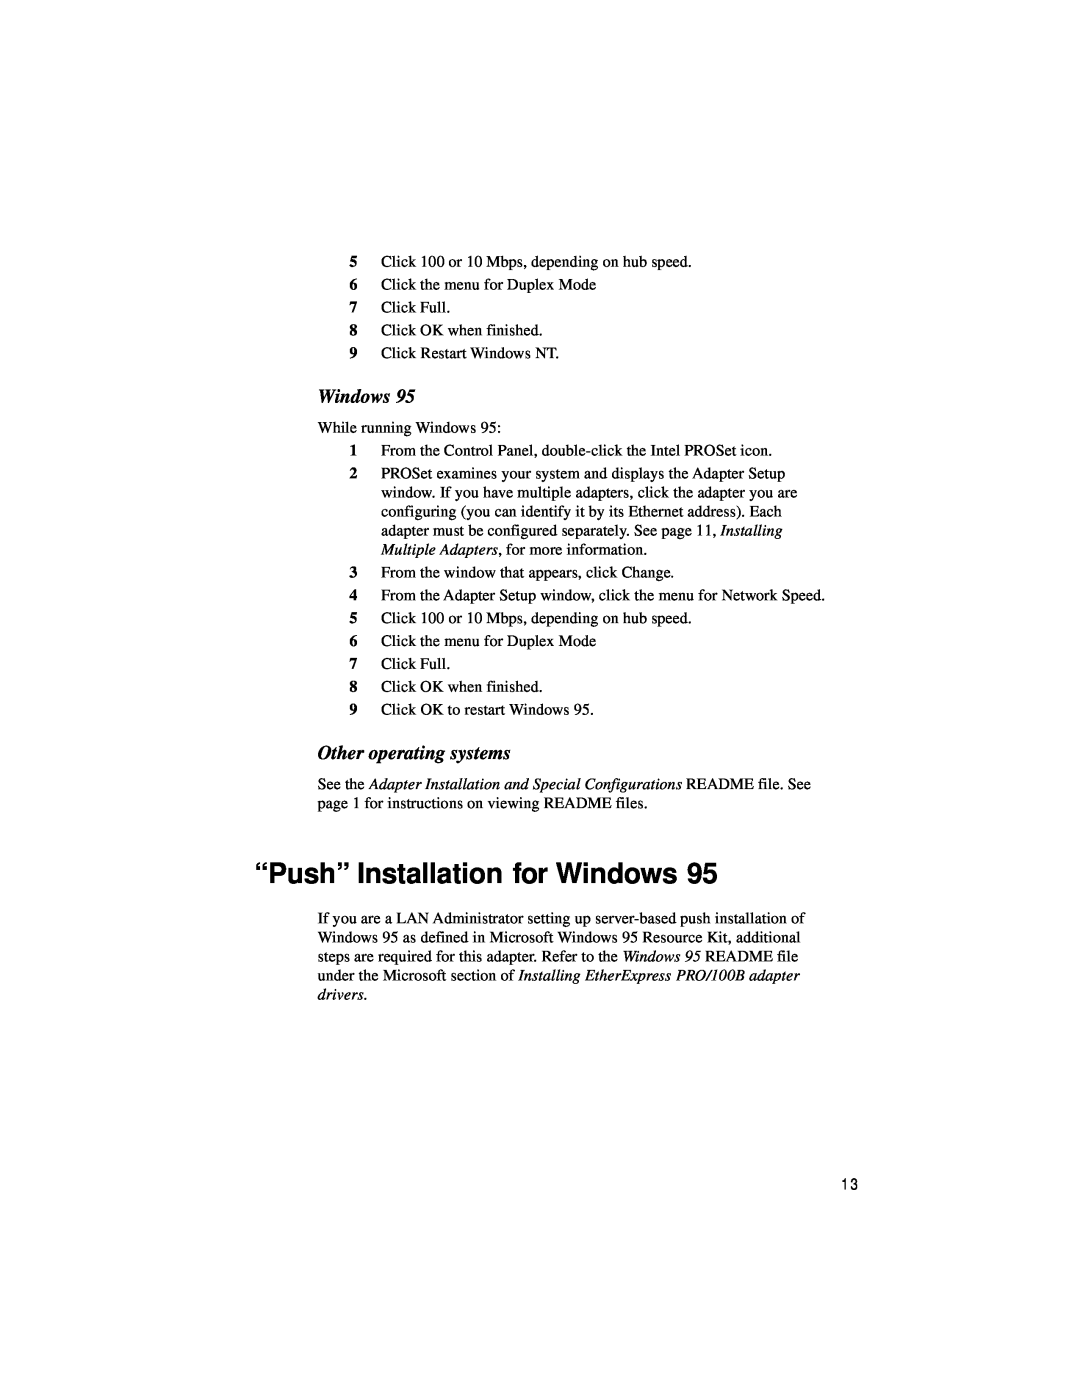 Intel PRO/100 TX PCI manual “Push” Installation for Windows, Other operating systems 